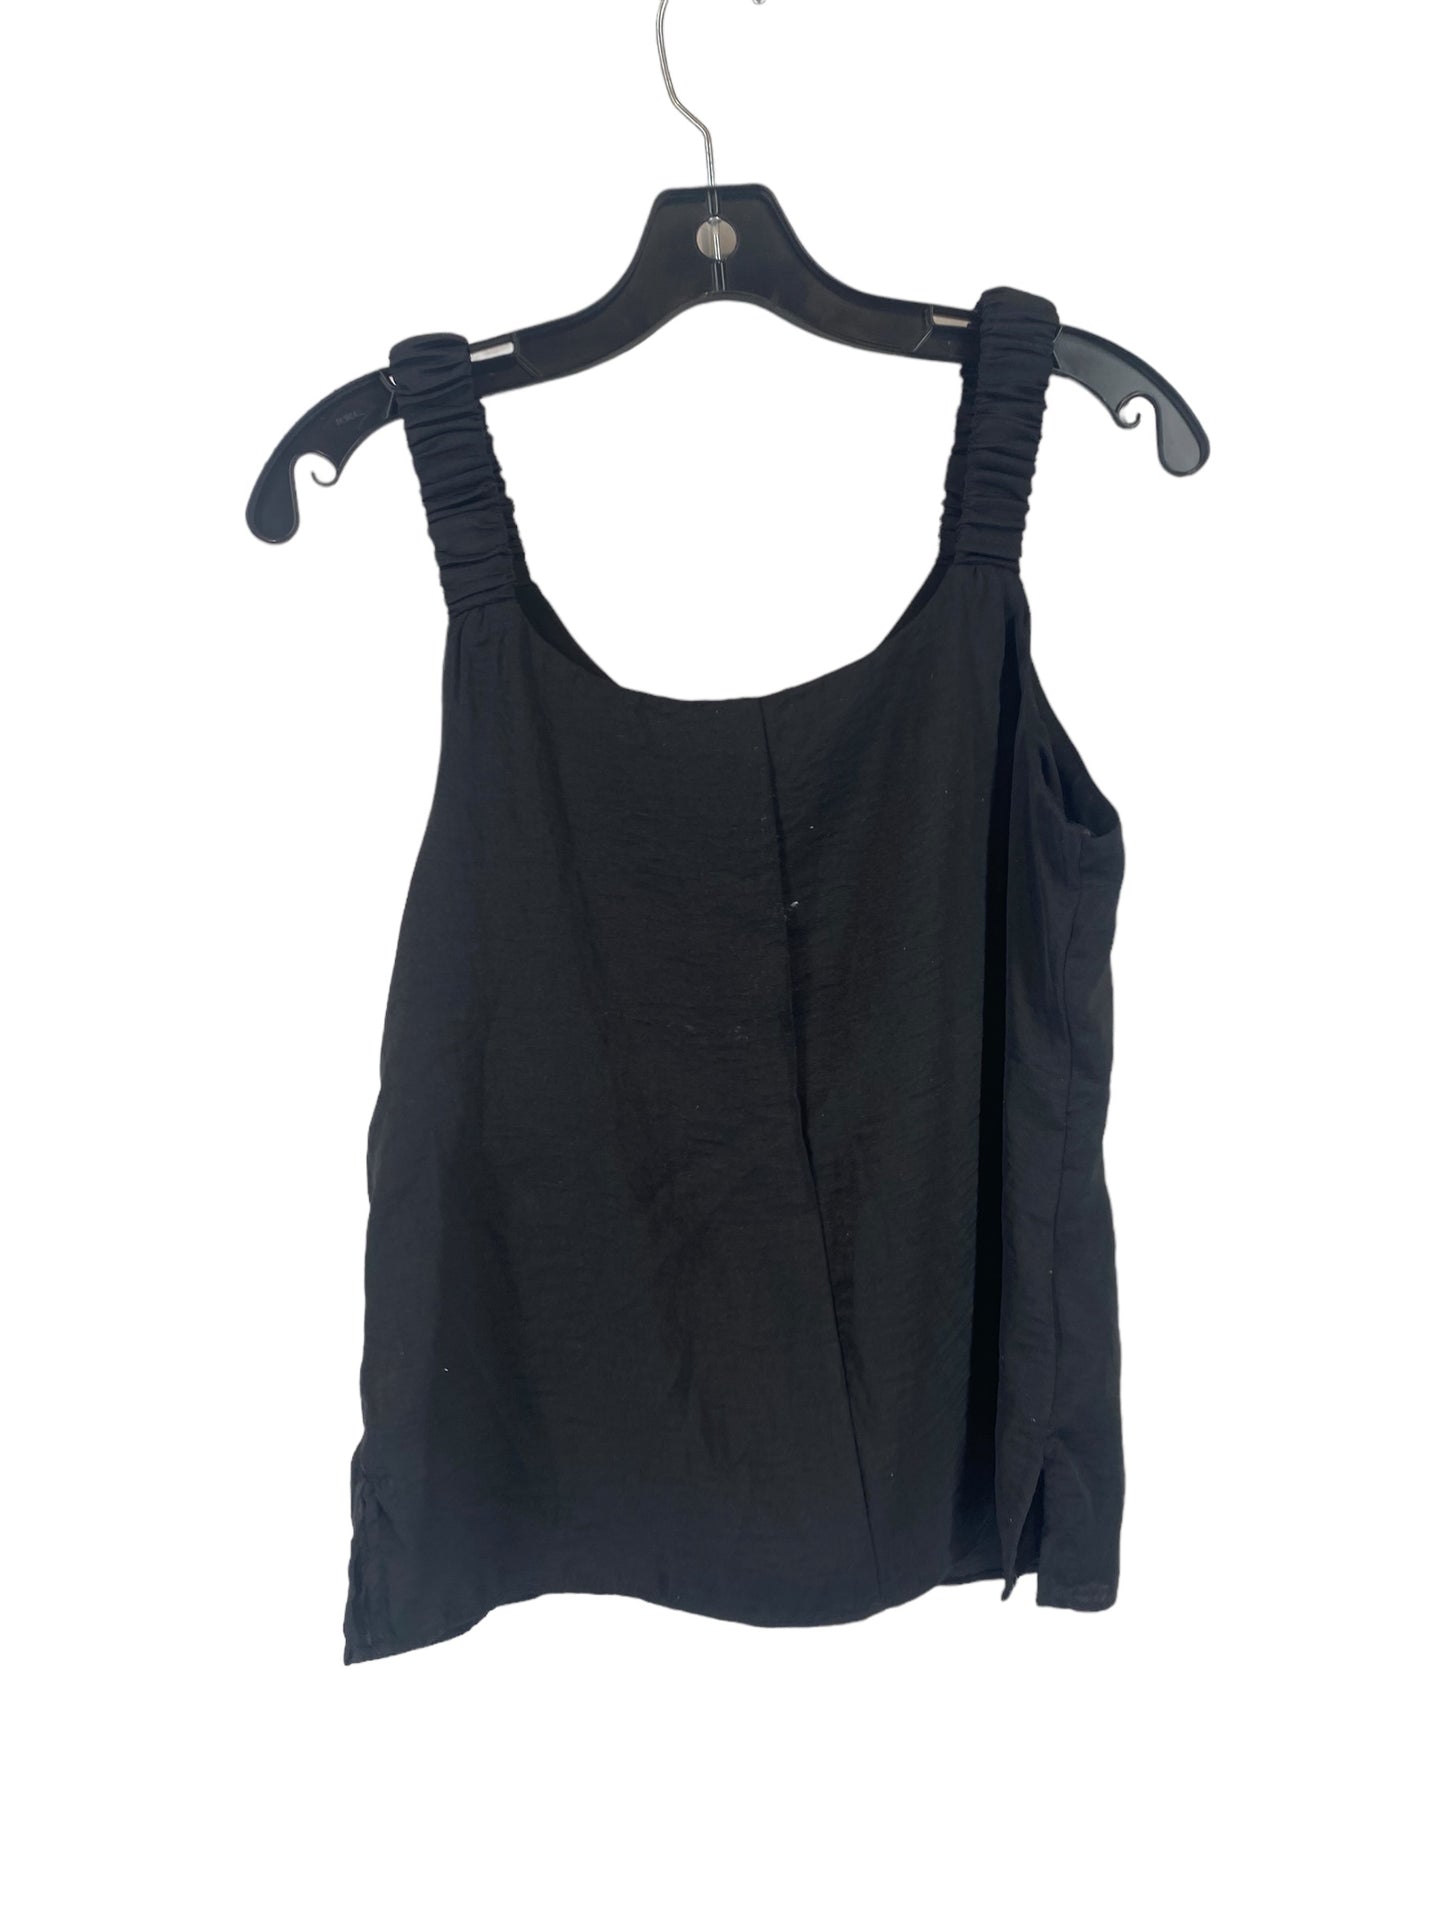 Black Top Sleeveless Vince Camuto, Size S